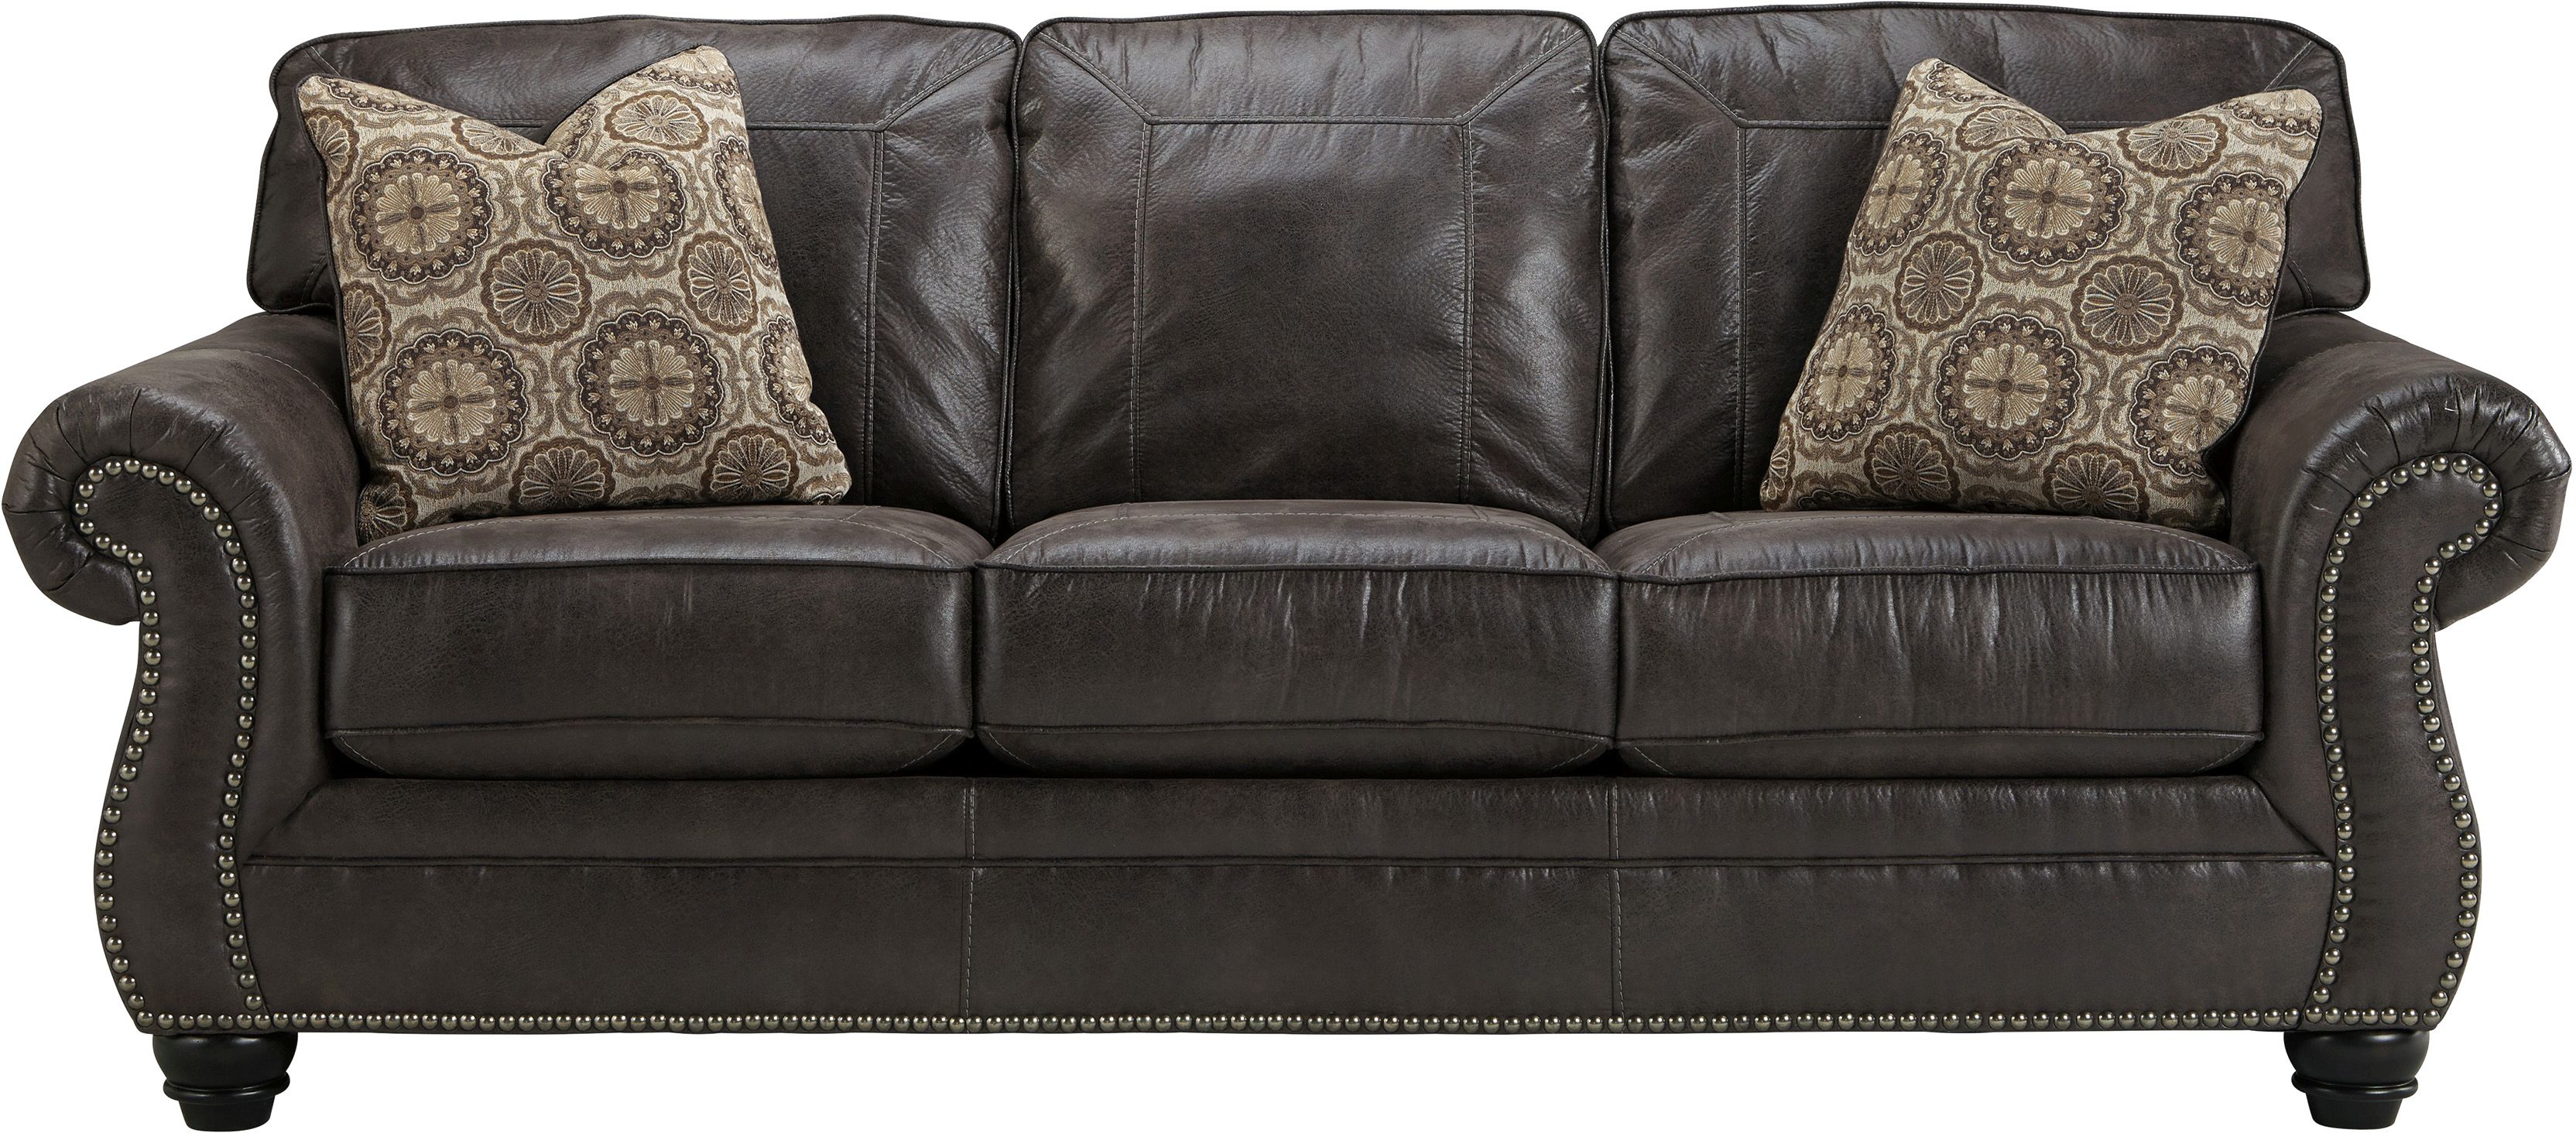 Benchcraft® Breville Charcoal Sofa